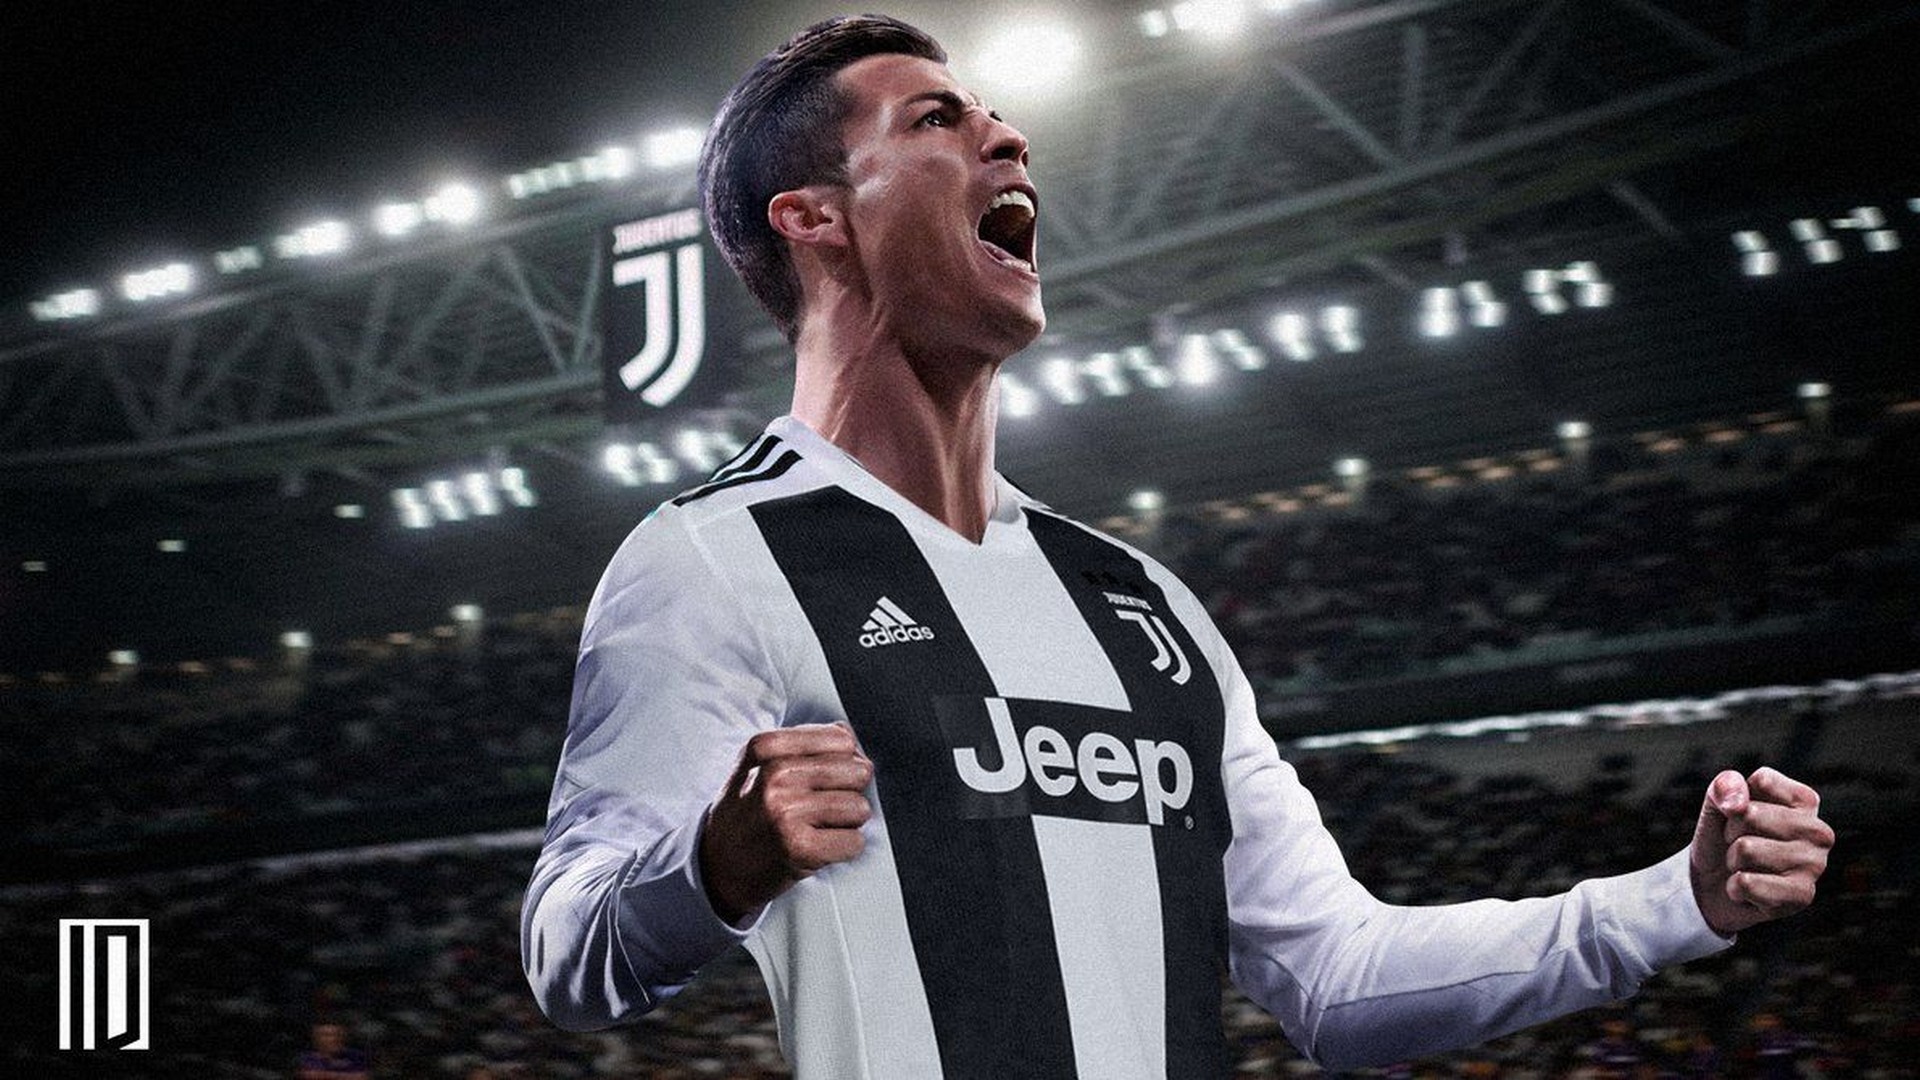 1920x1080 Cristiano Ronaldo Juventus Background Wallpaper HD with image resolution   pixel. You can make this